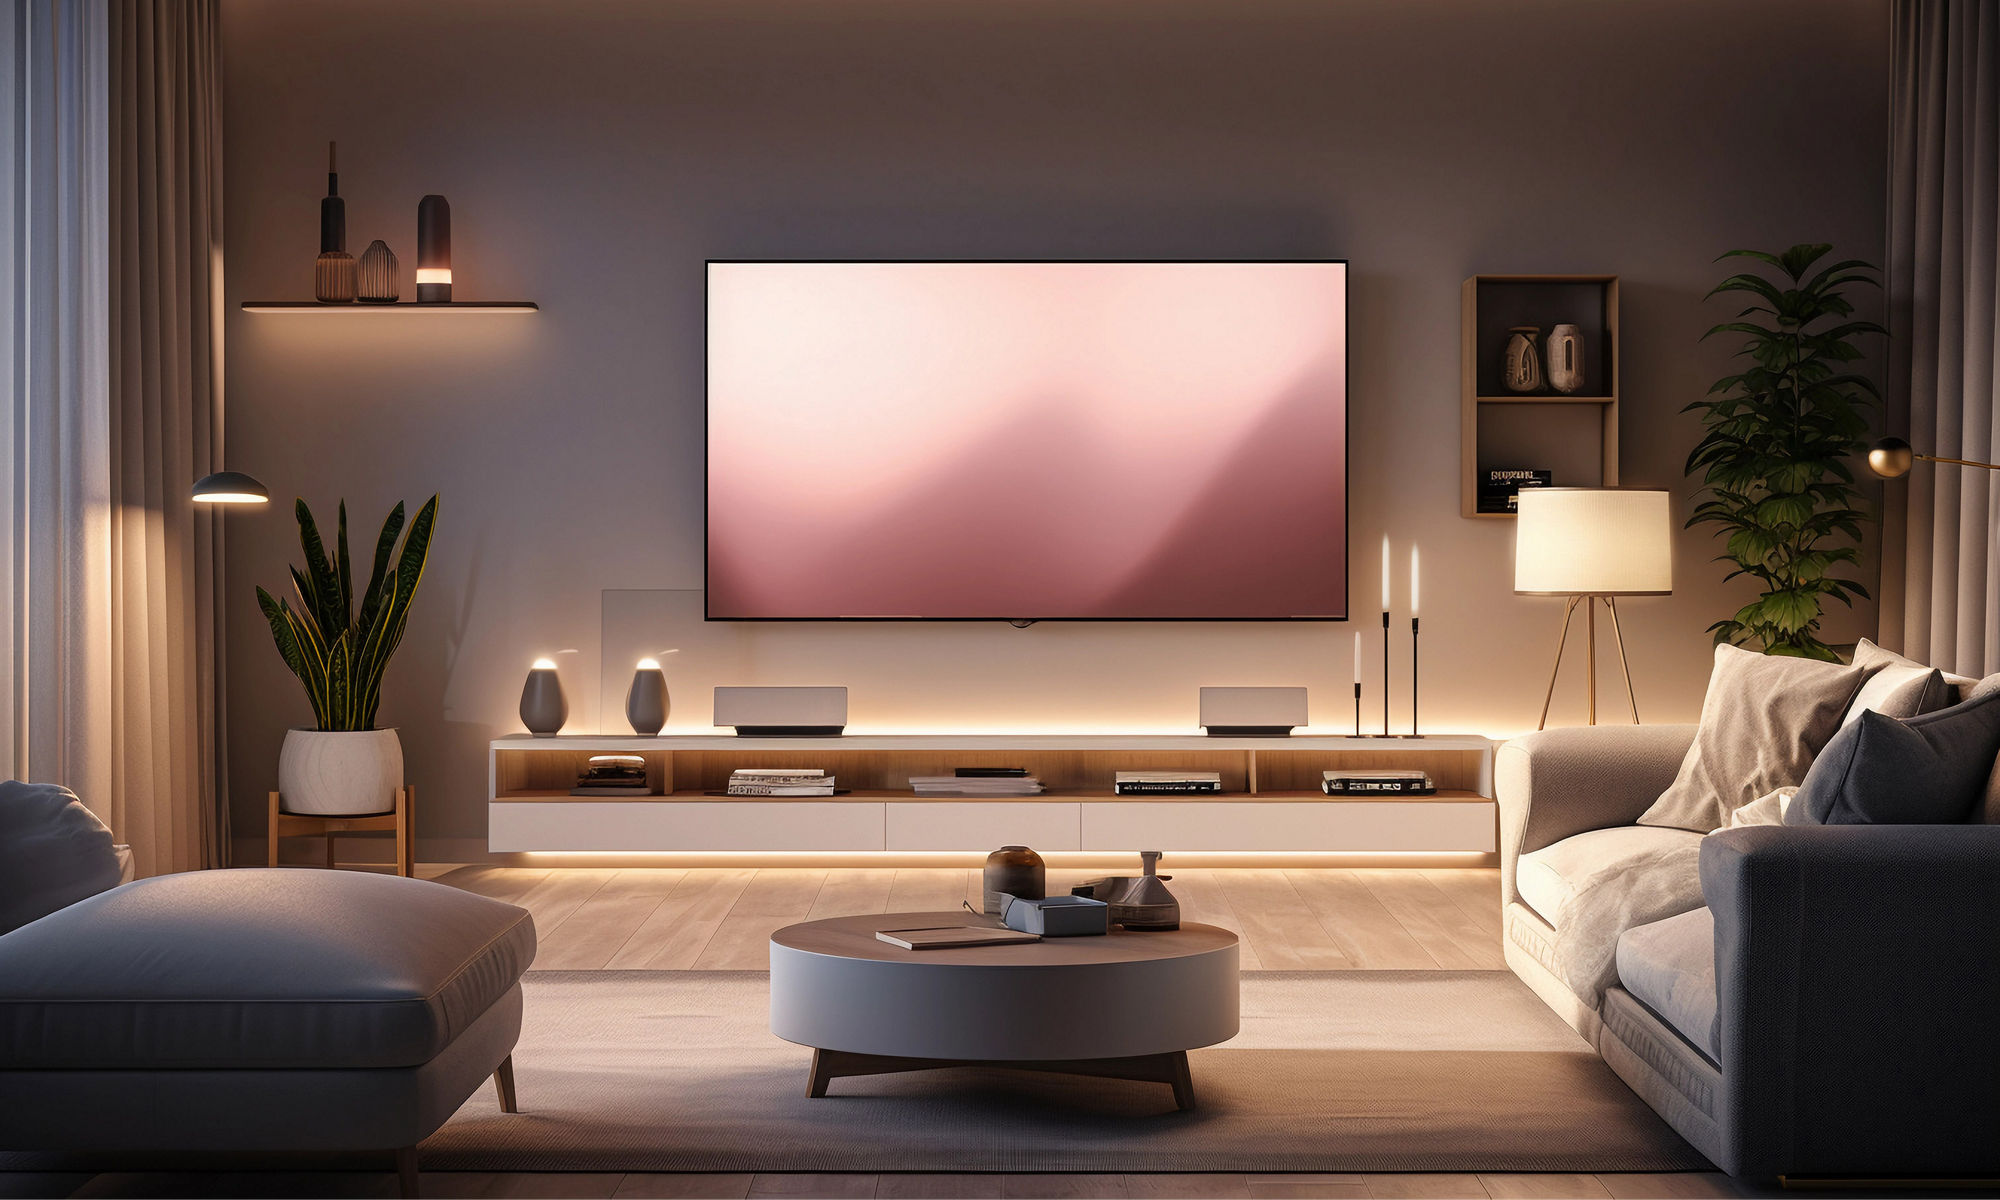 a modern living room illuminated by ambient smart home technology; changing LED lights behind the TV, smart speaker on the side table, thermostat mounted on the wall, IoT devices